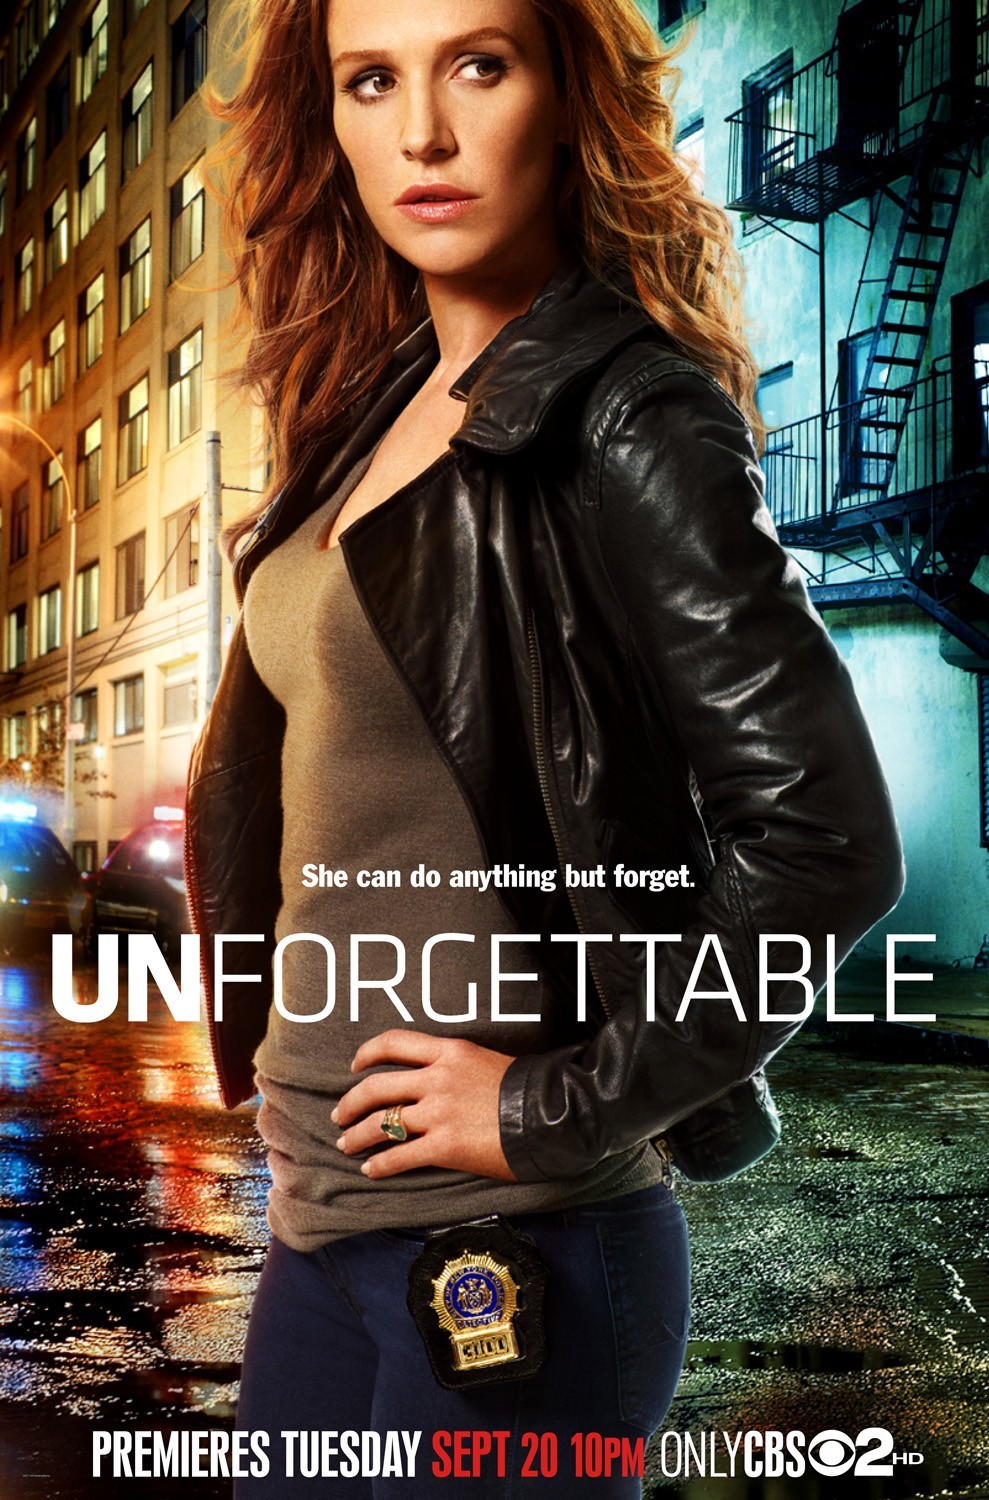 Unforgettable Movies Show: A Night to Remember